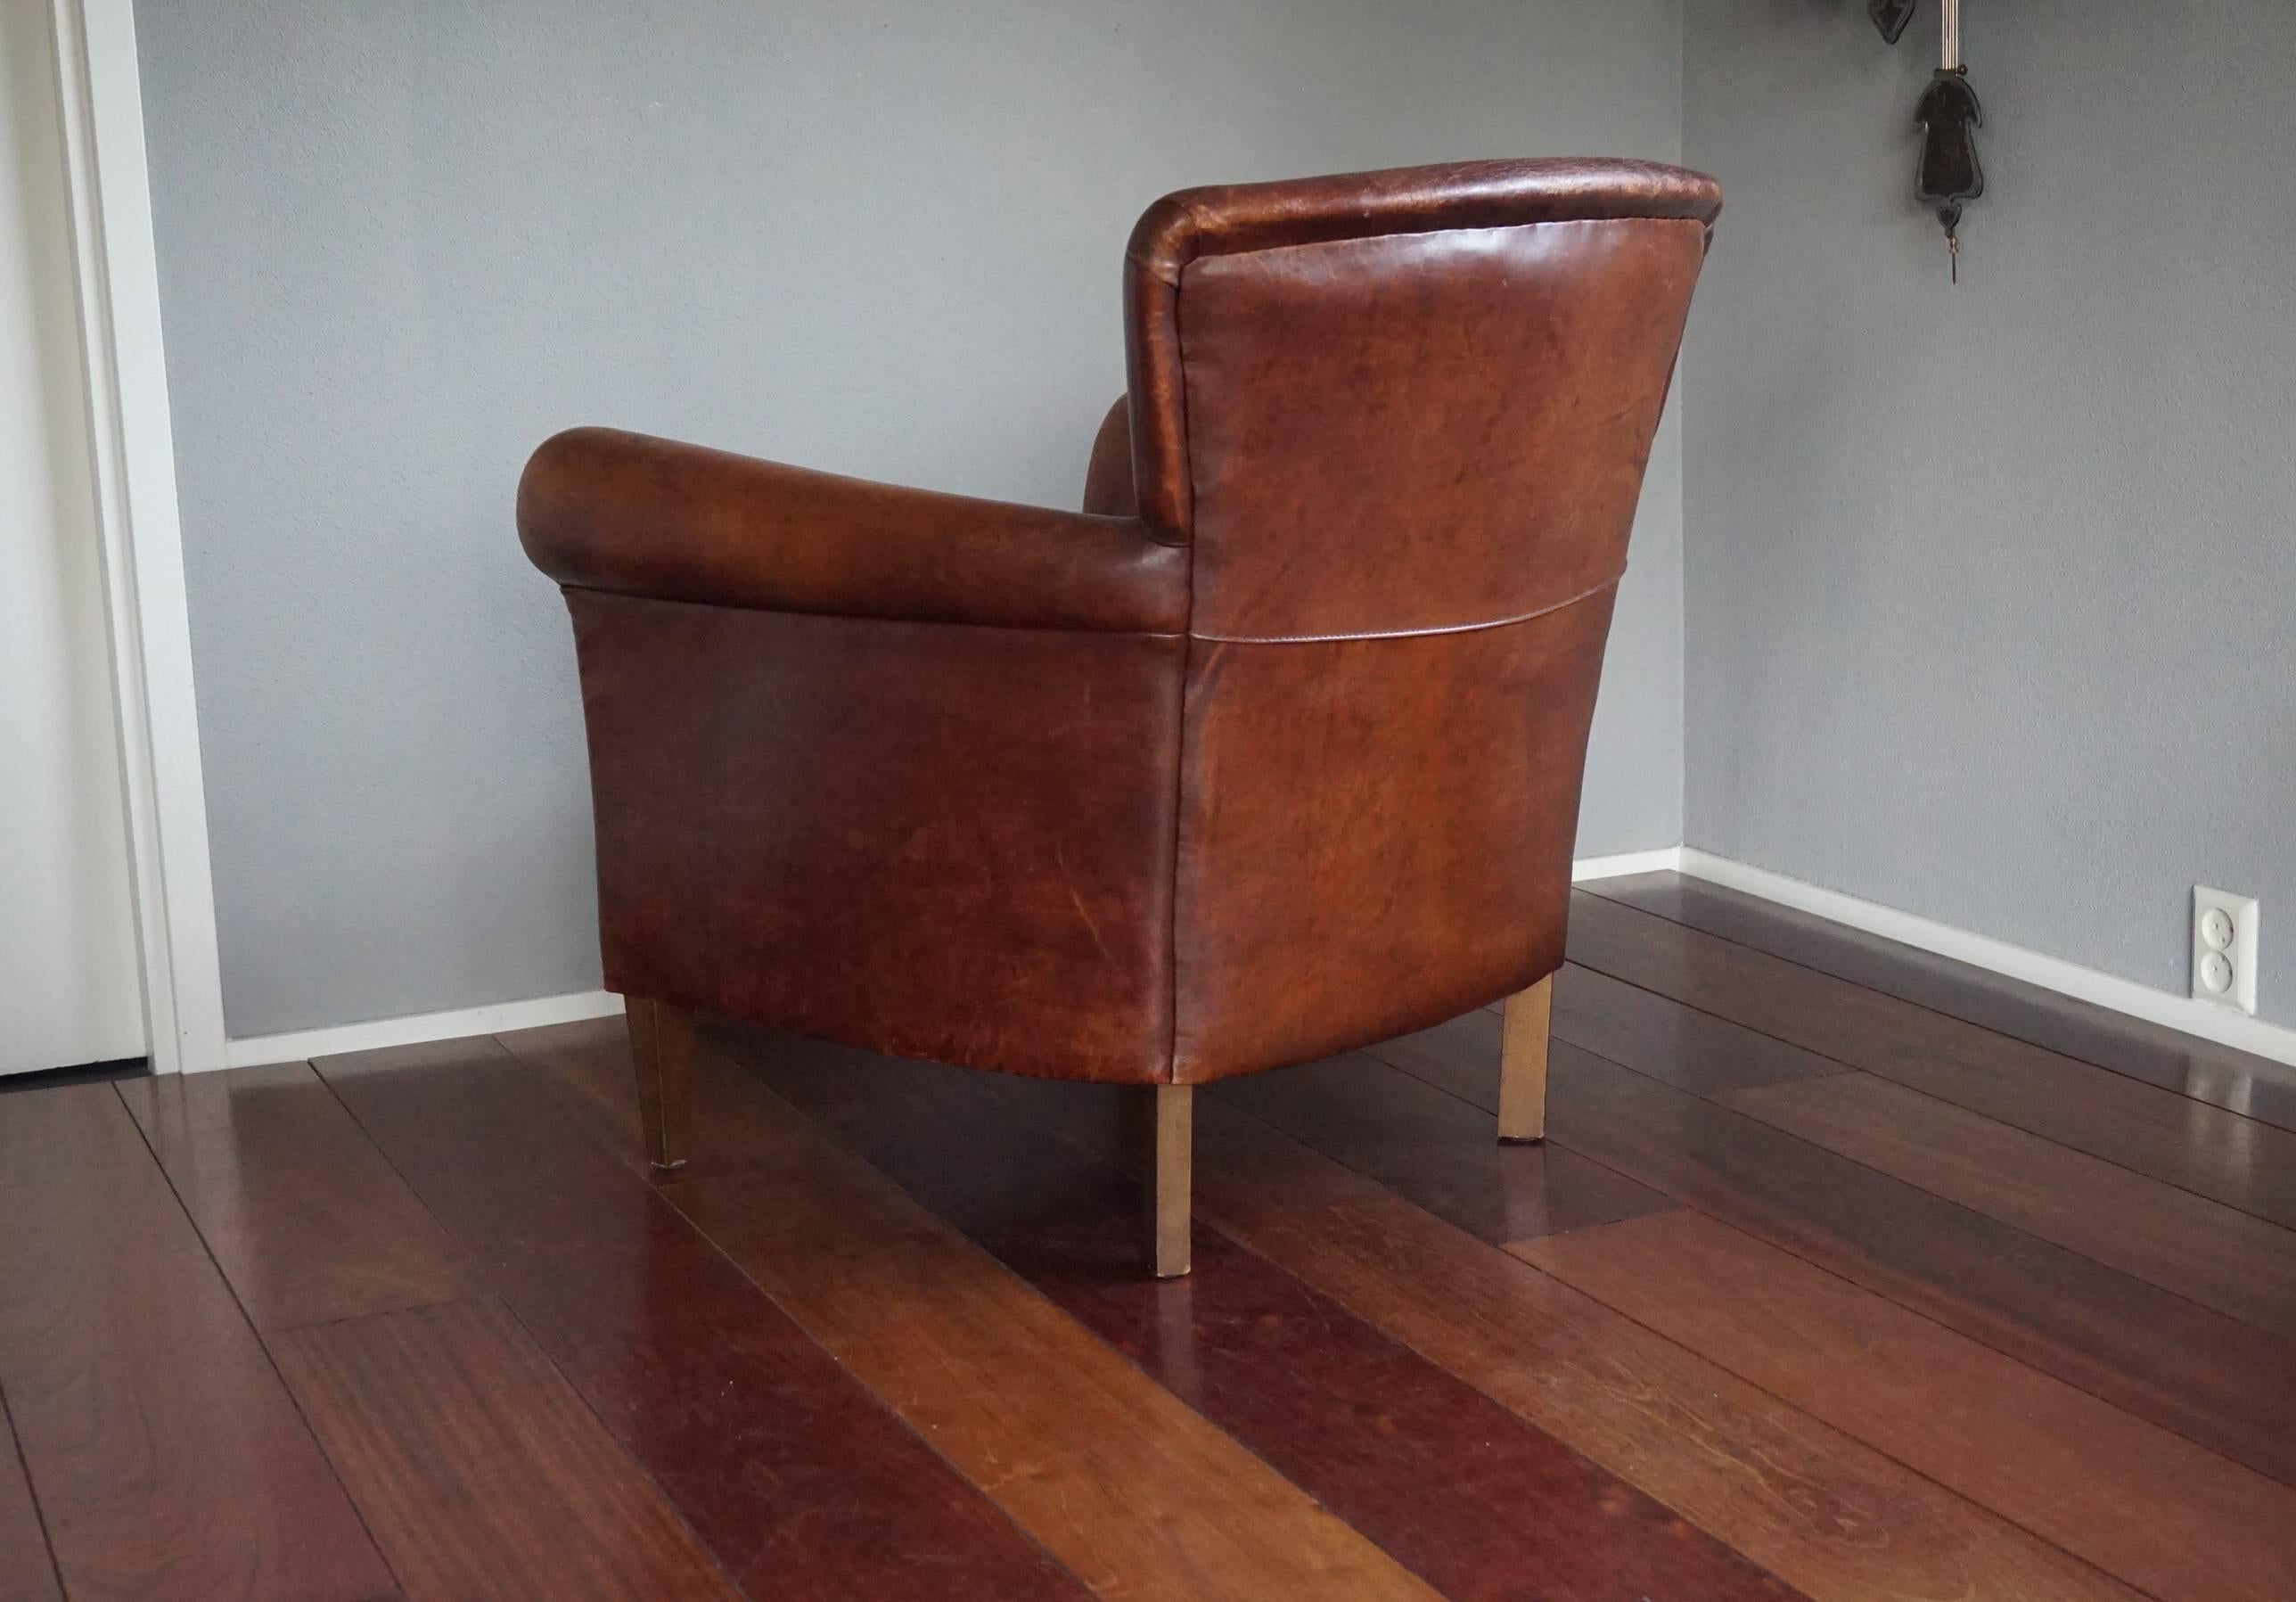 Great Quality and Condition Sheep Leather & Wood Chair Armchair with Warm Patina 1